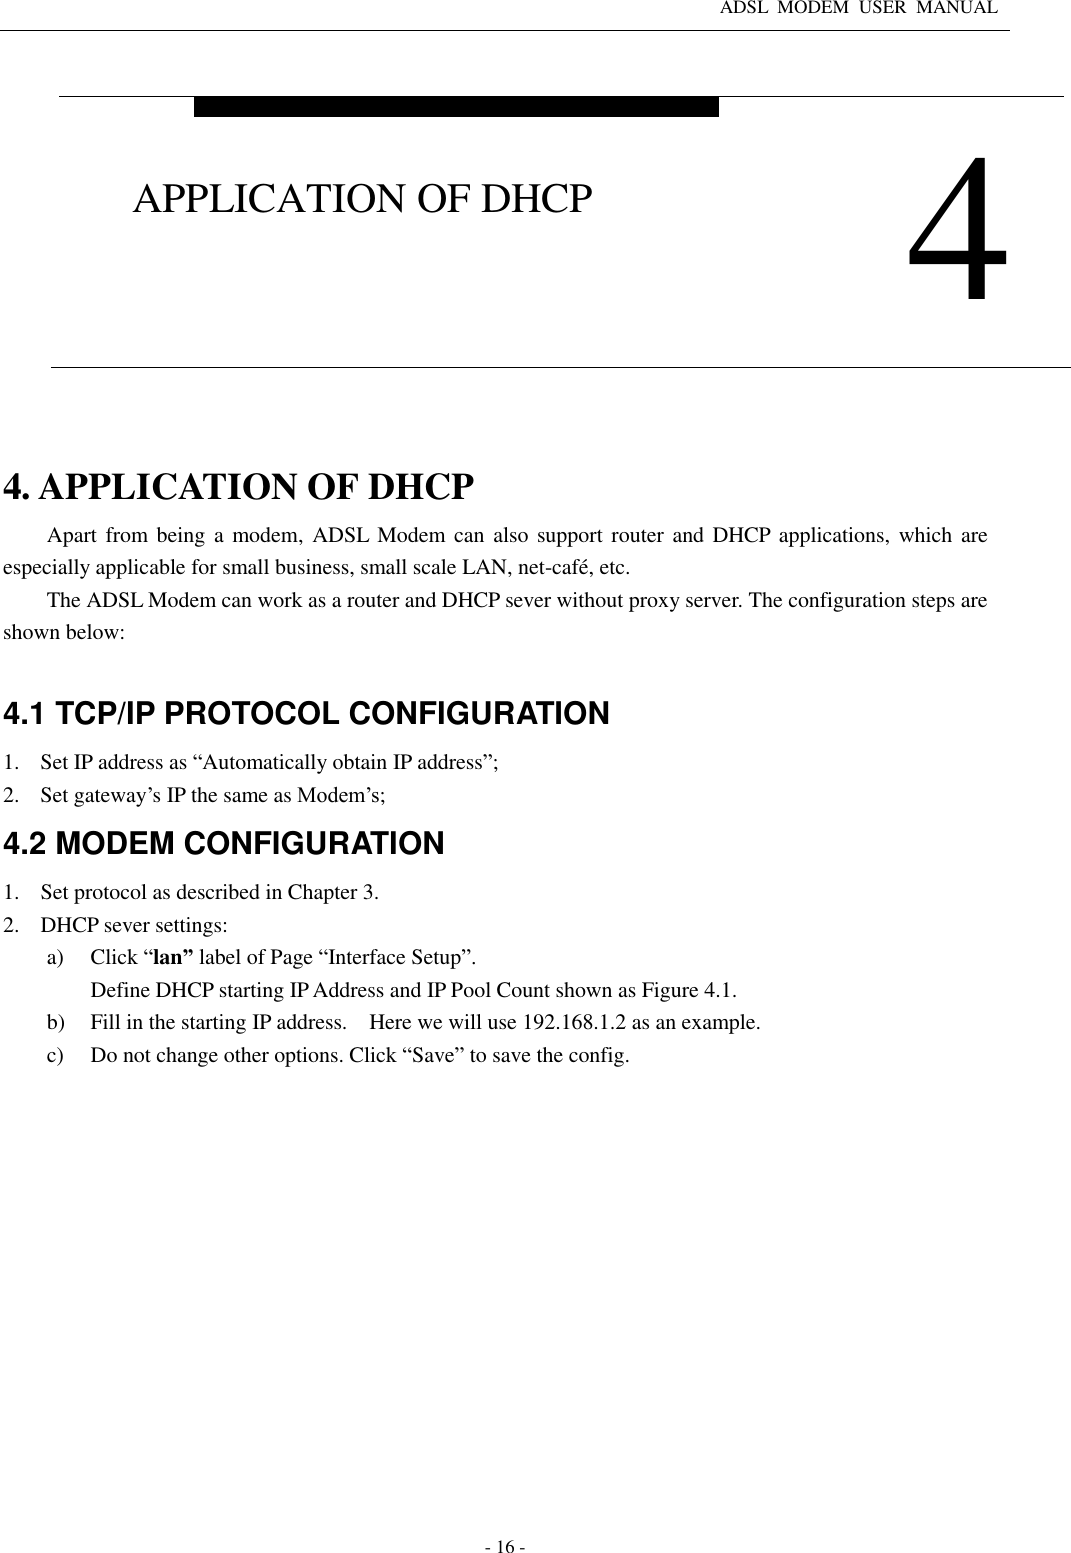 ADSL  MODEM  USER  MANUAL   - 16 -  4. APPLICATION OF DHCP Apart from being a  modem,  ADSL  Modem can also support router and DHCP  applications, which are especially applicable for small business, small scale LAN, net-café, etc.   The ADSL Modem can work as a router and DHCP sever without proxy server. The configuration steps are shown below:    4.1 TCP/IP PROTOCOL CONFIGURATION 1. Set IP address as “Automatically obtain IP address”; 2. Set gateway’s IP the same as Modem’s; 4.2 MODEM CONFIGURATION 1. Set protocol as described in Chapter 3. 2. DHCP sever settings: a) Click “lan” label of Page “Interface Setup”.   Define DHCP starting IP Address and IP Pool Count shown as Figure 4.1.   b) Fill in the starting IP address.    Here we will use 192.168.1.2 as an example. c) Do not change other options. Click “Save” to save the config.  4 APPLICATION OF DHCP 